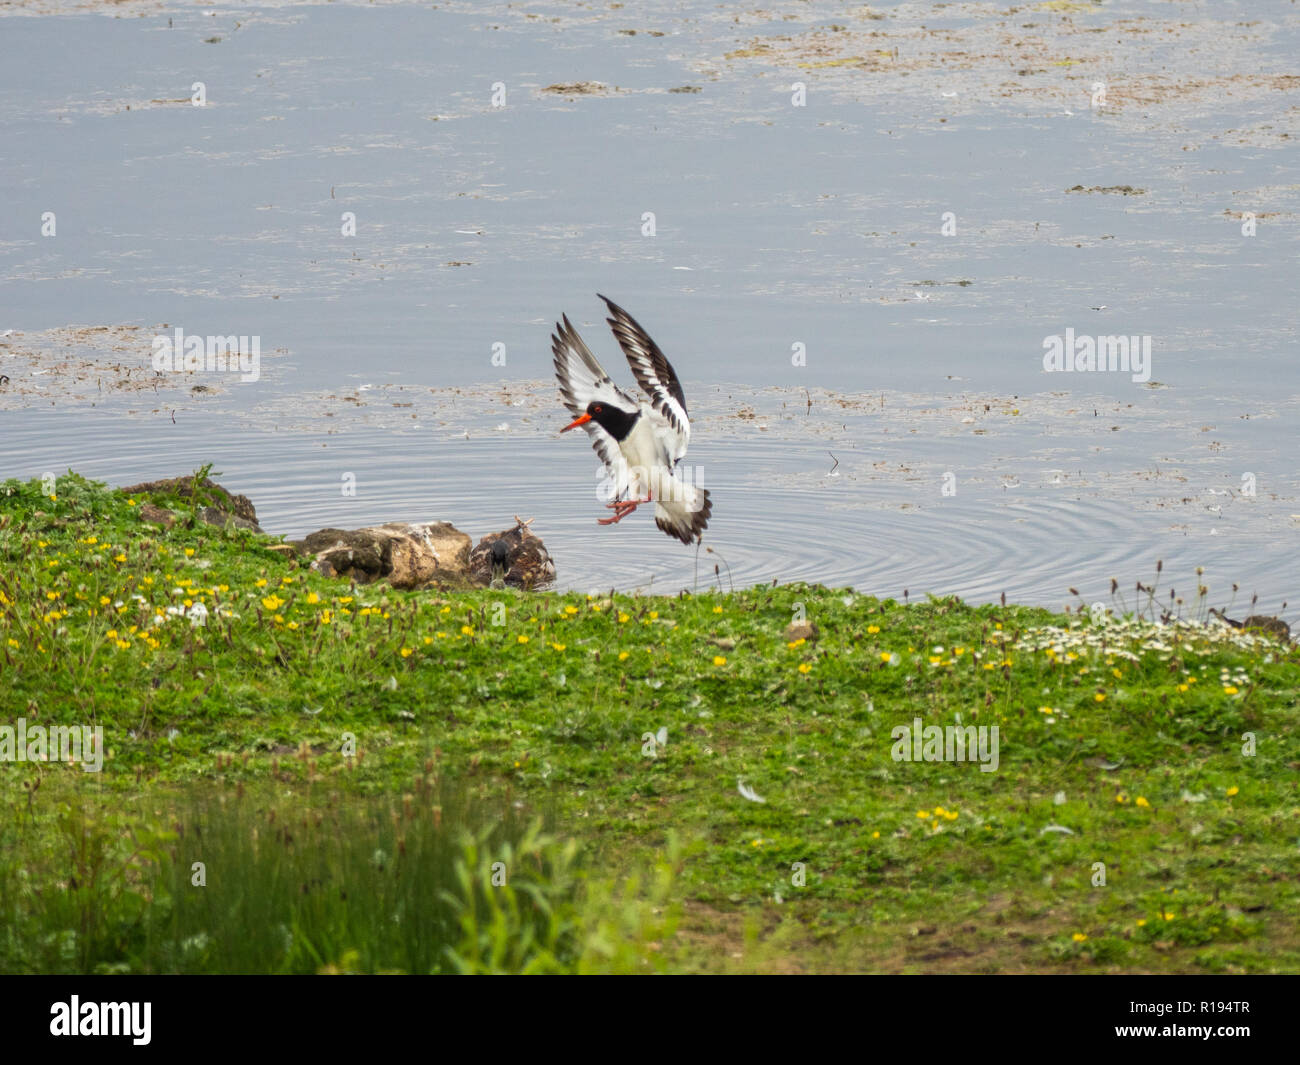 Oystercatcher coming in to land on grass bank Stock Photo